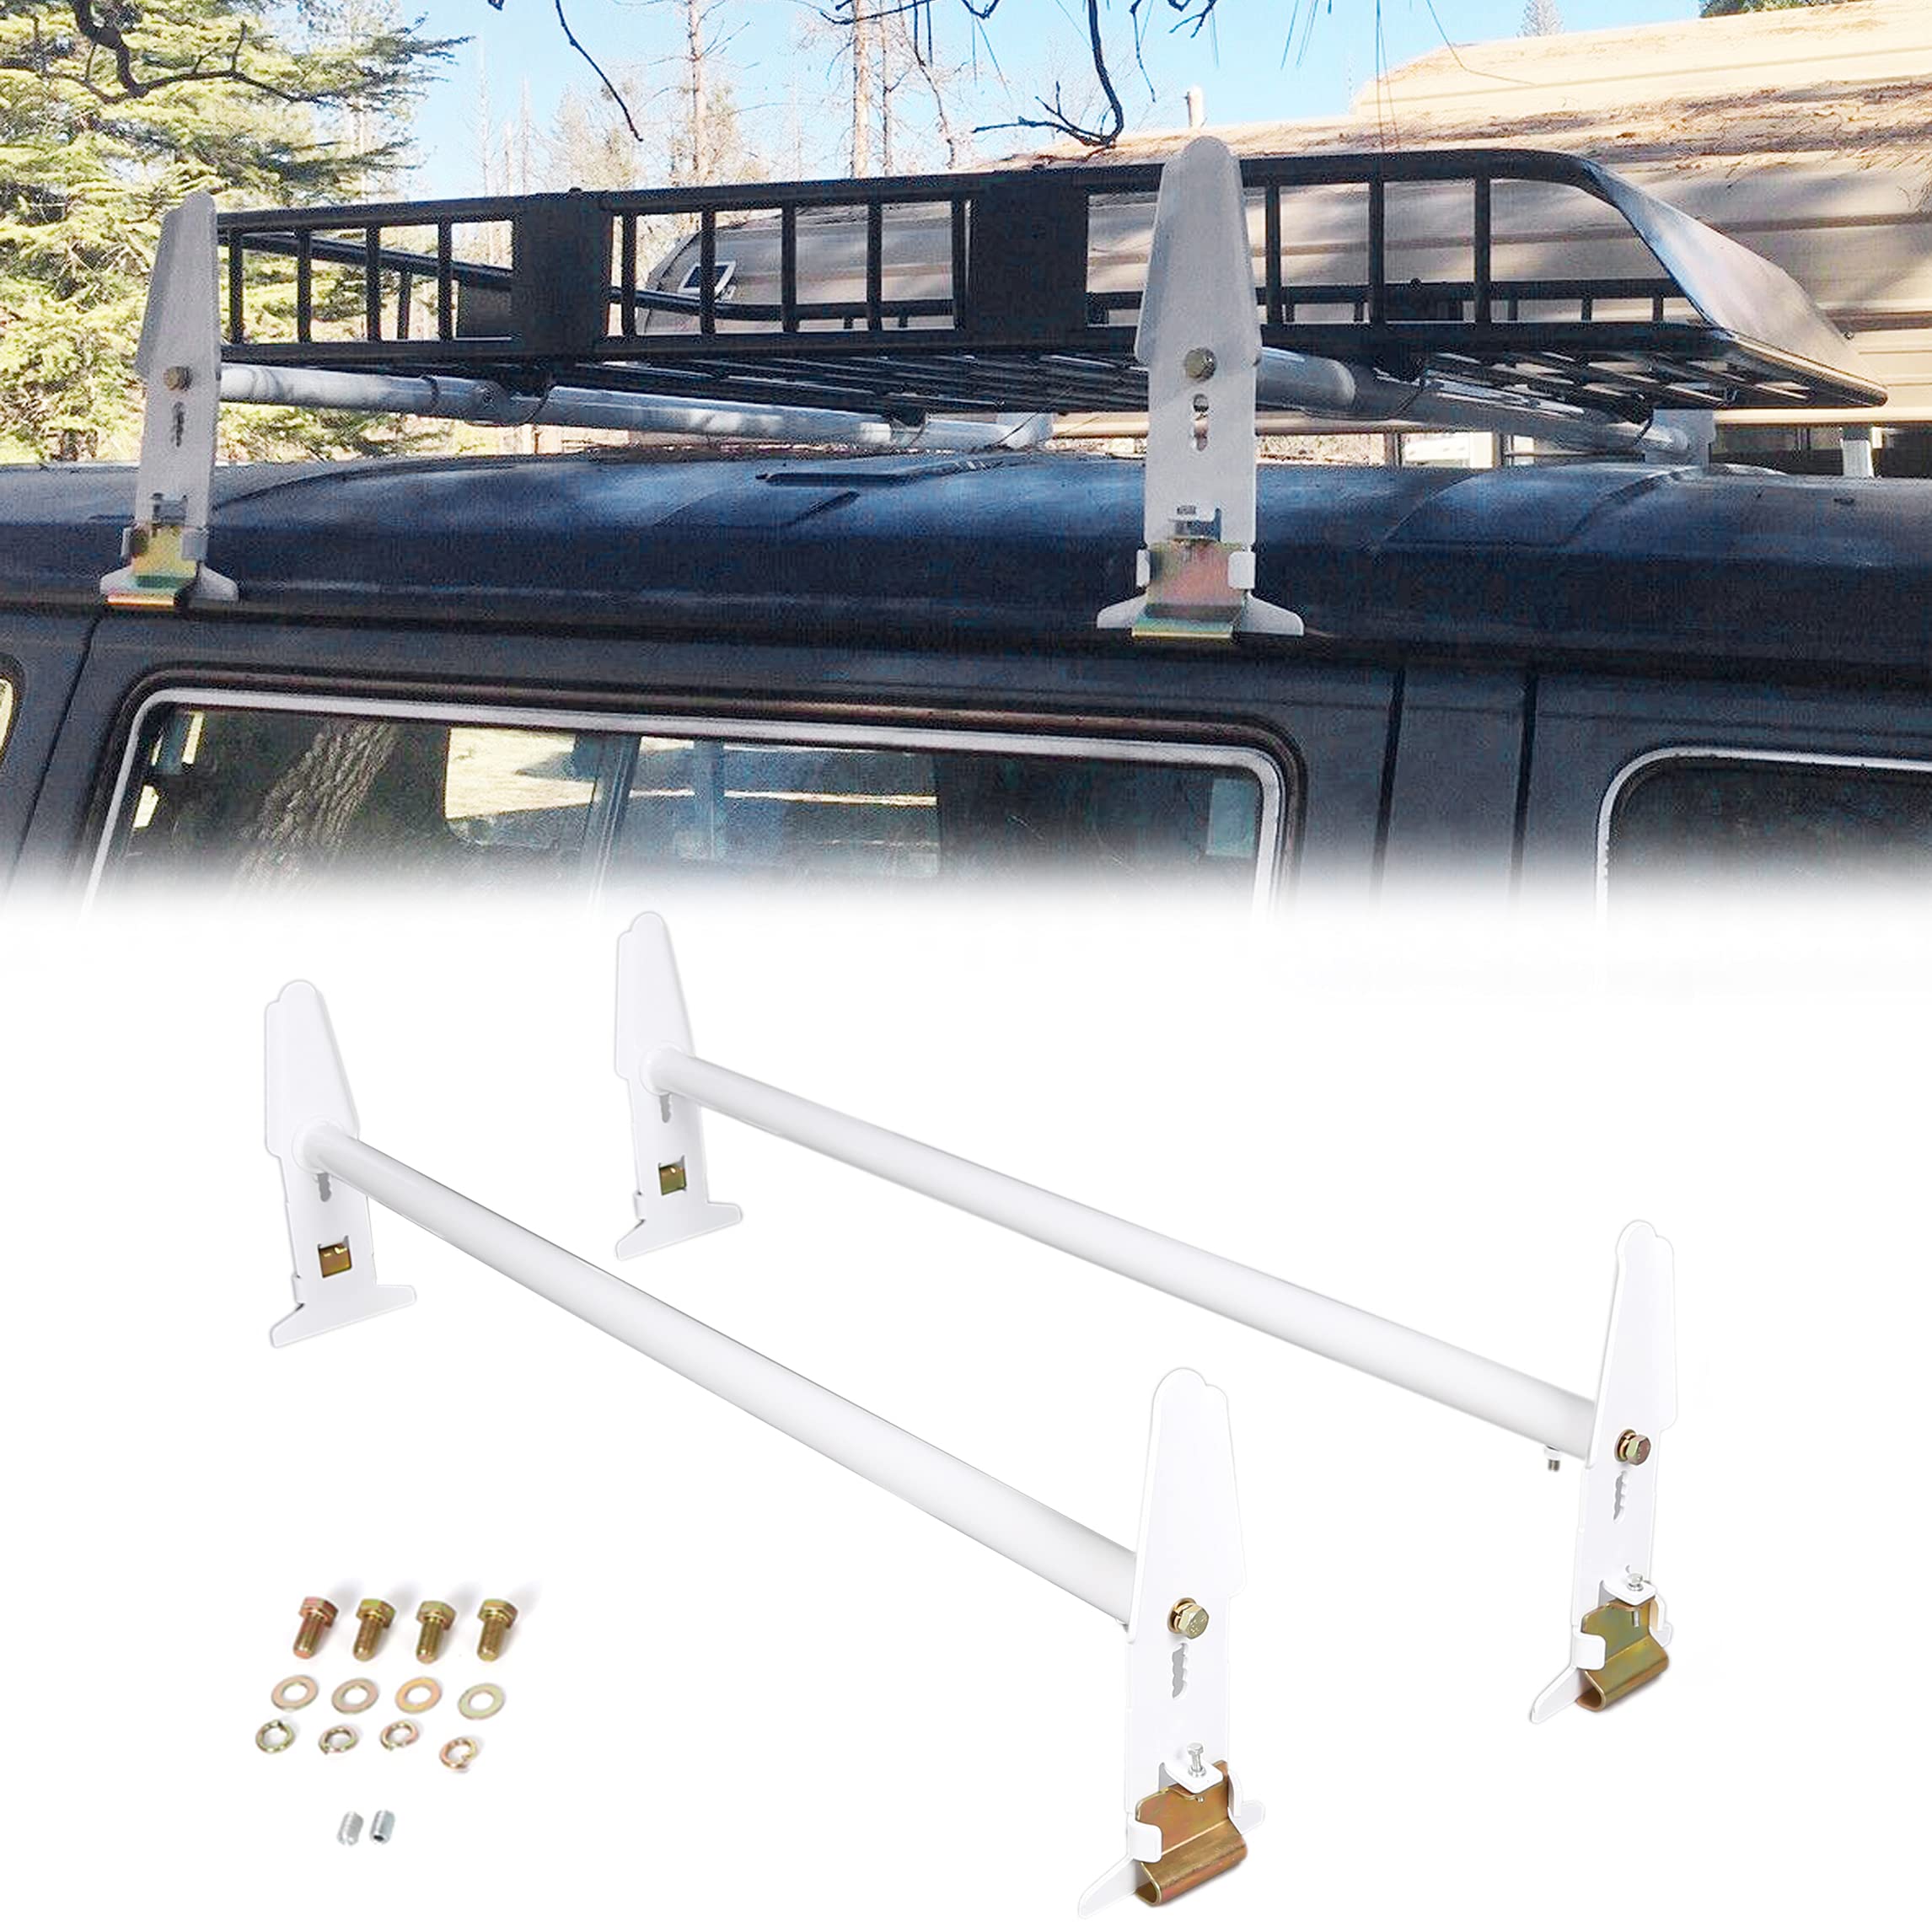 ECOTRIC Adjustable Van Roof Ladder Rack 500LBS 2 Bars for Chevy Dodge Ford GMC Express 77''